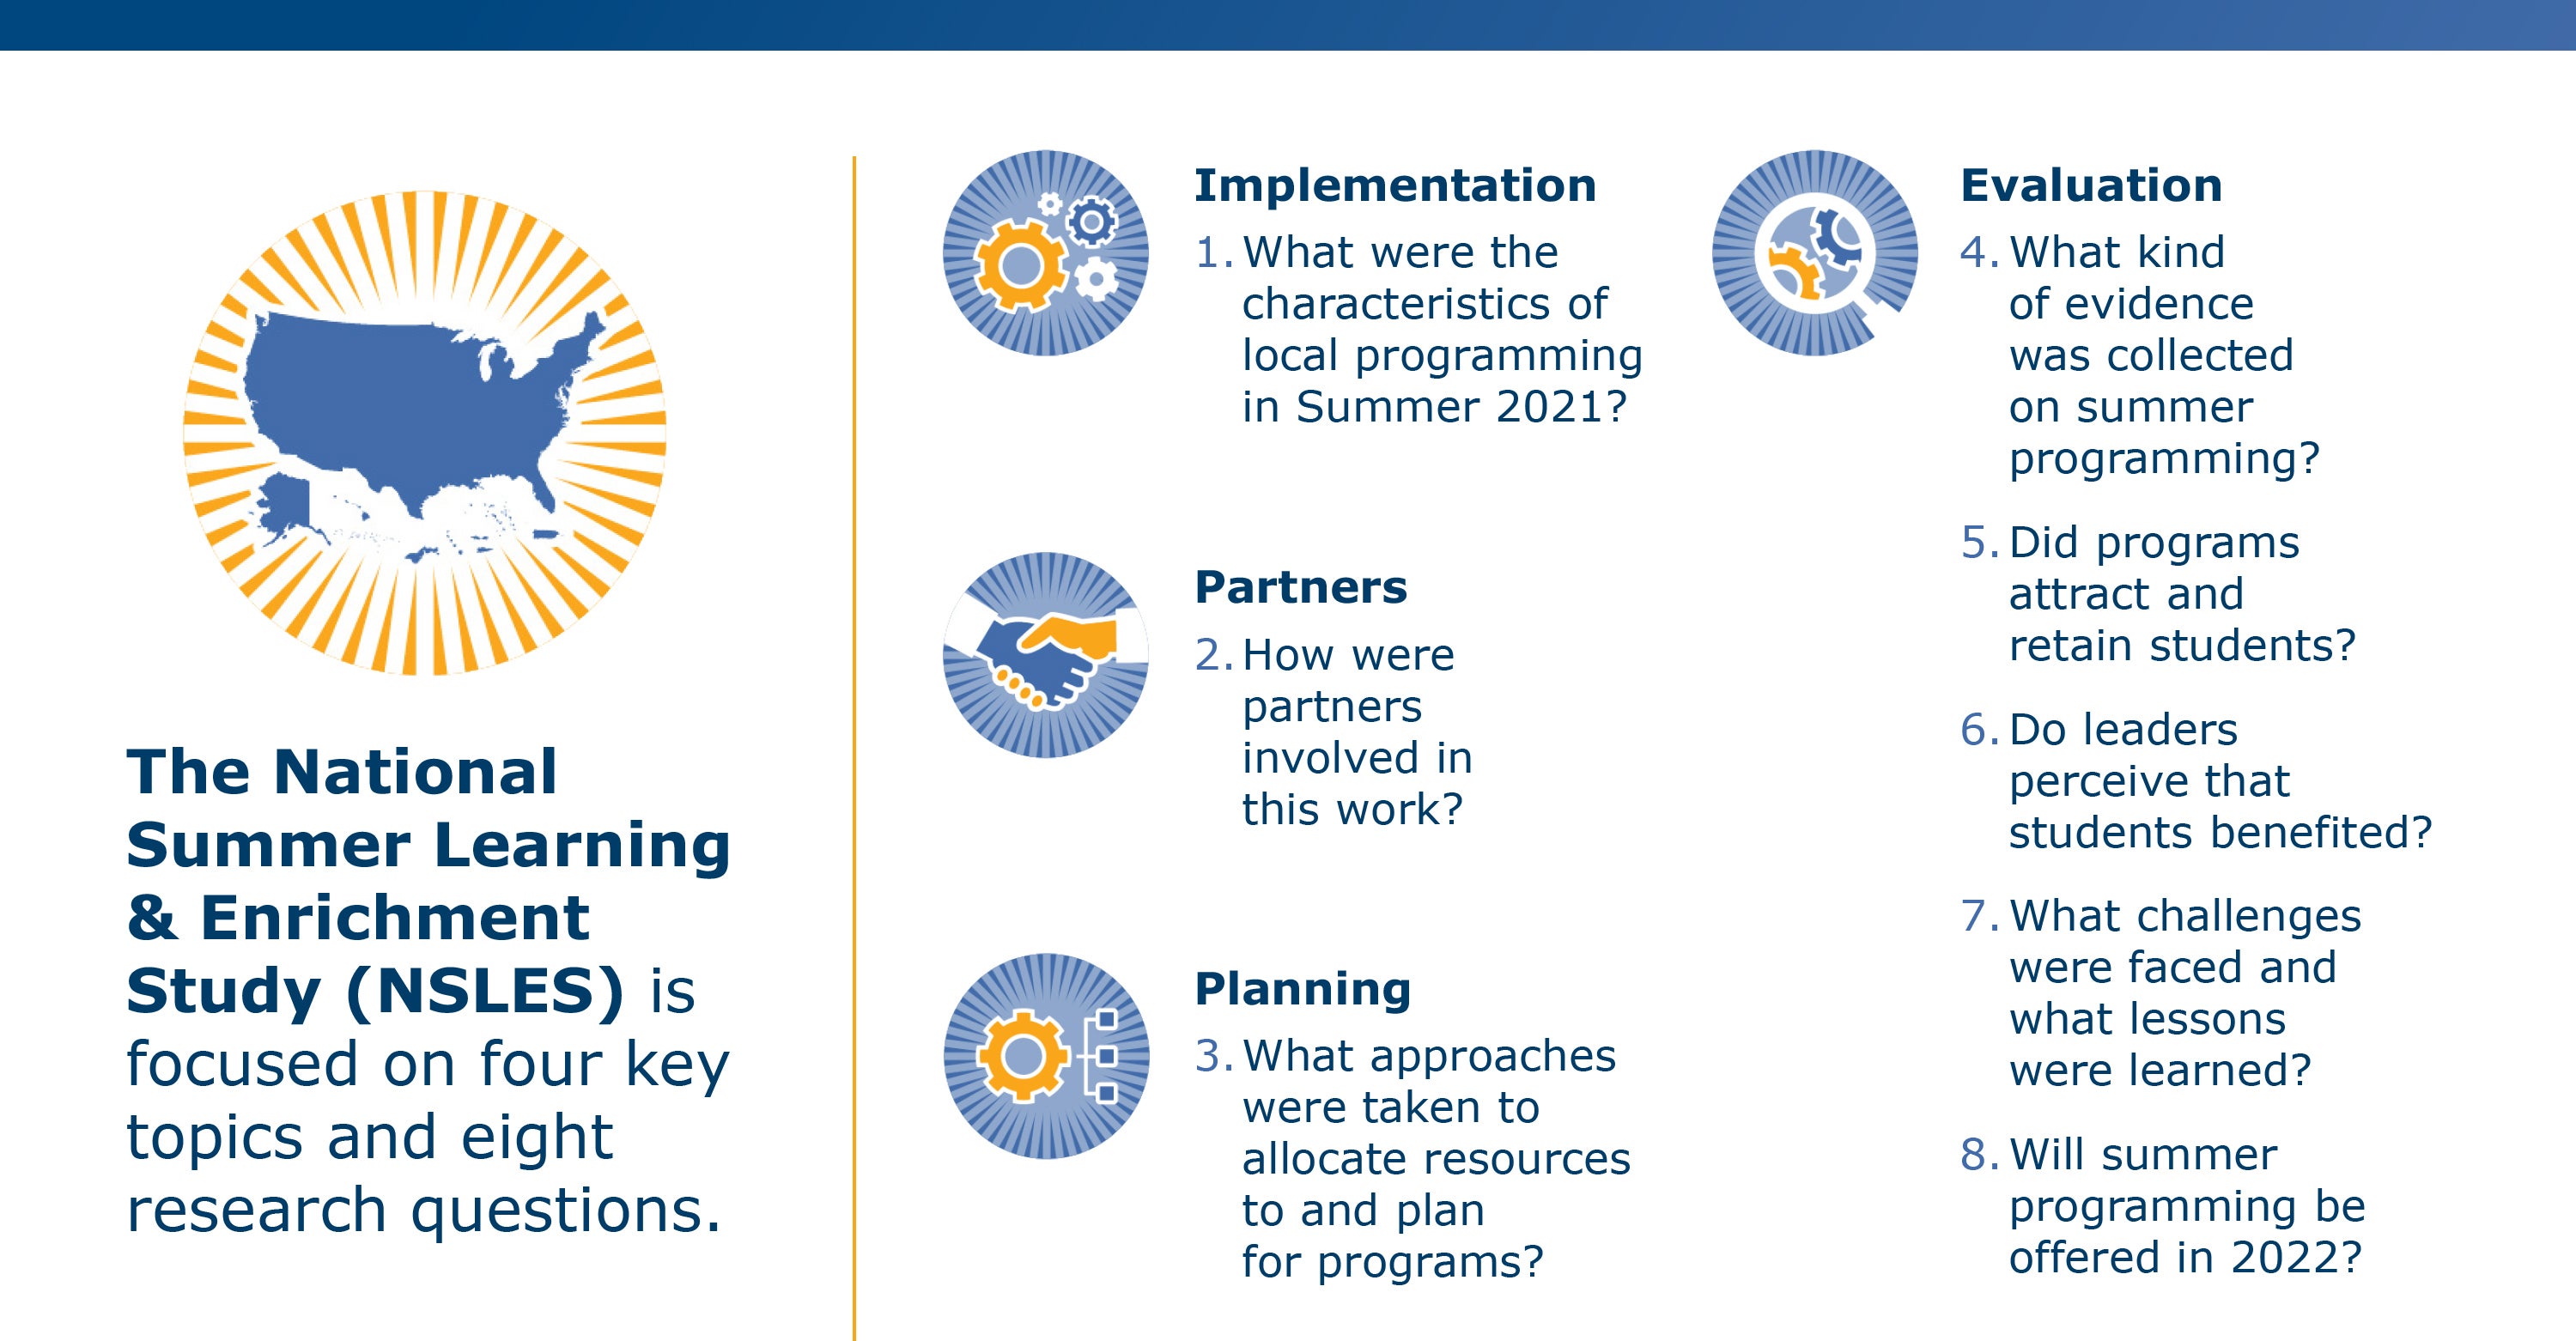 Graphic of the key topics and research questions the National Summer Learning & Enrichment Survey focused on.